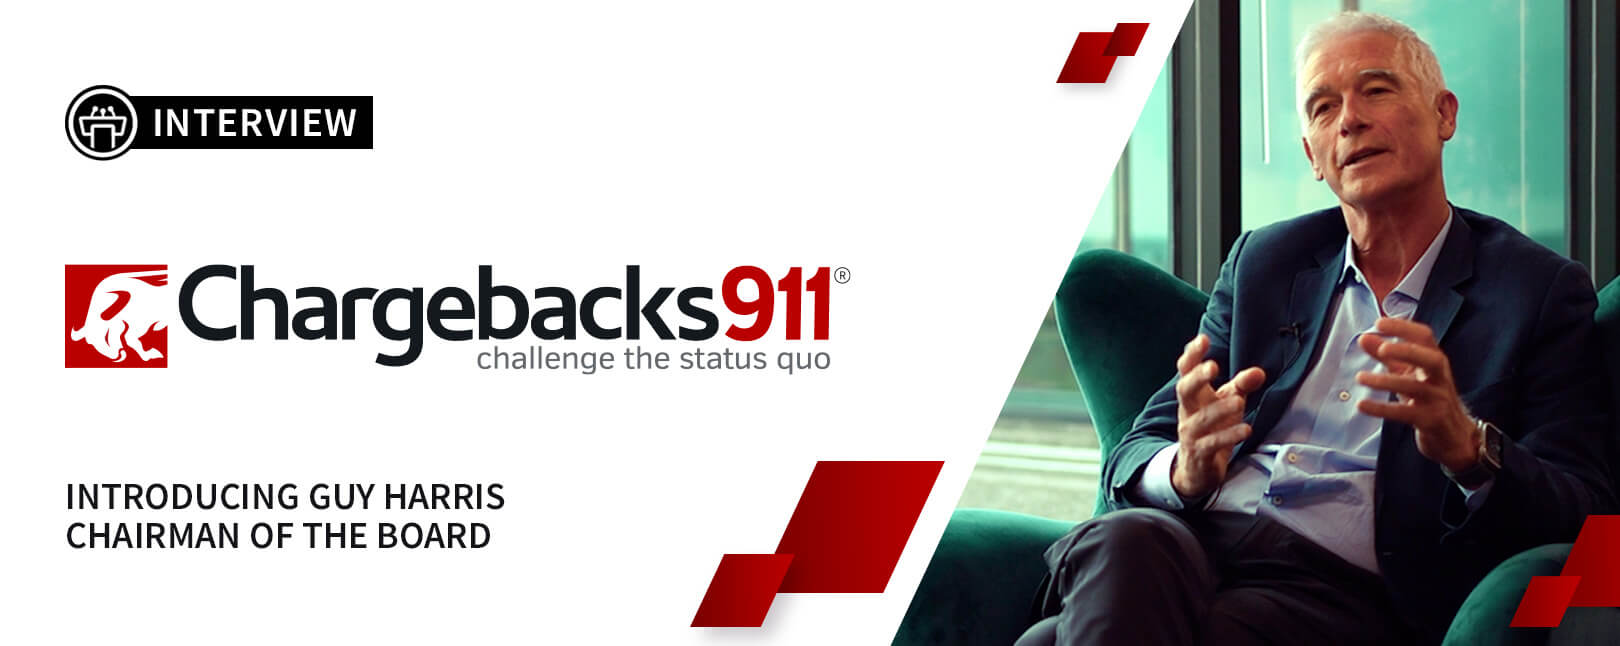 WATCH NOW: Exclusive Interview With Guy Harris of Chargebacks911®!